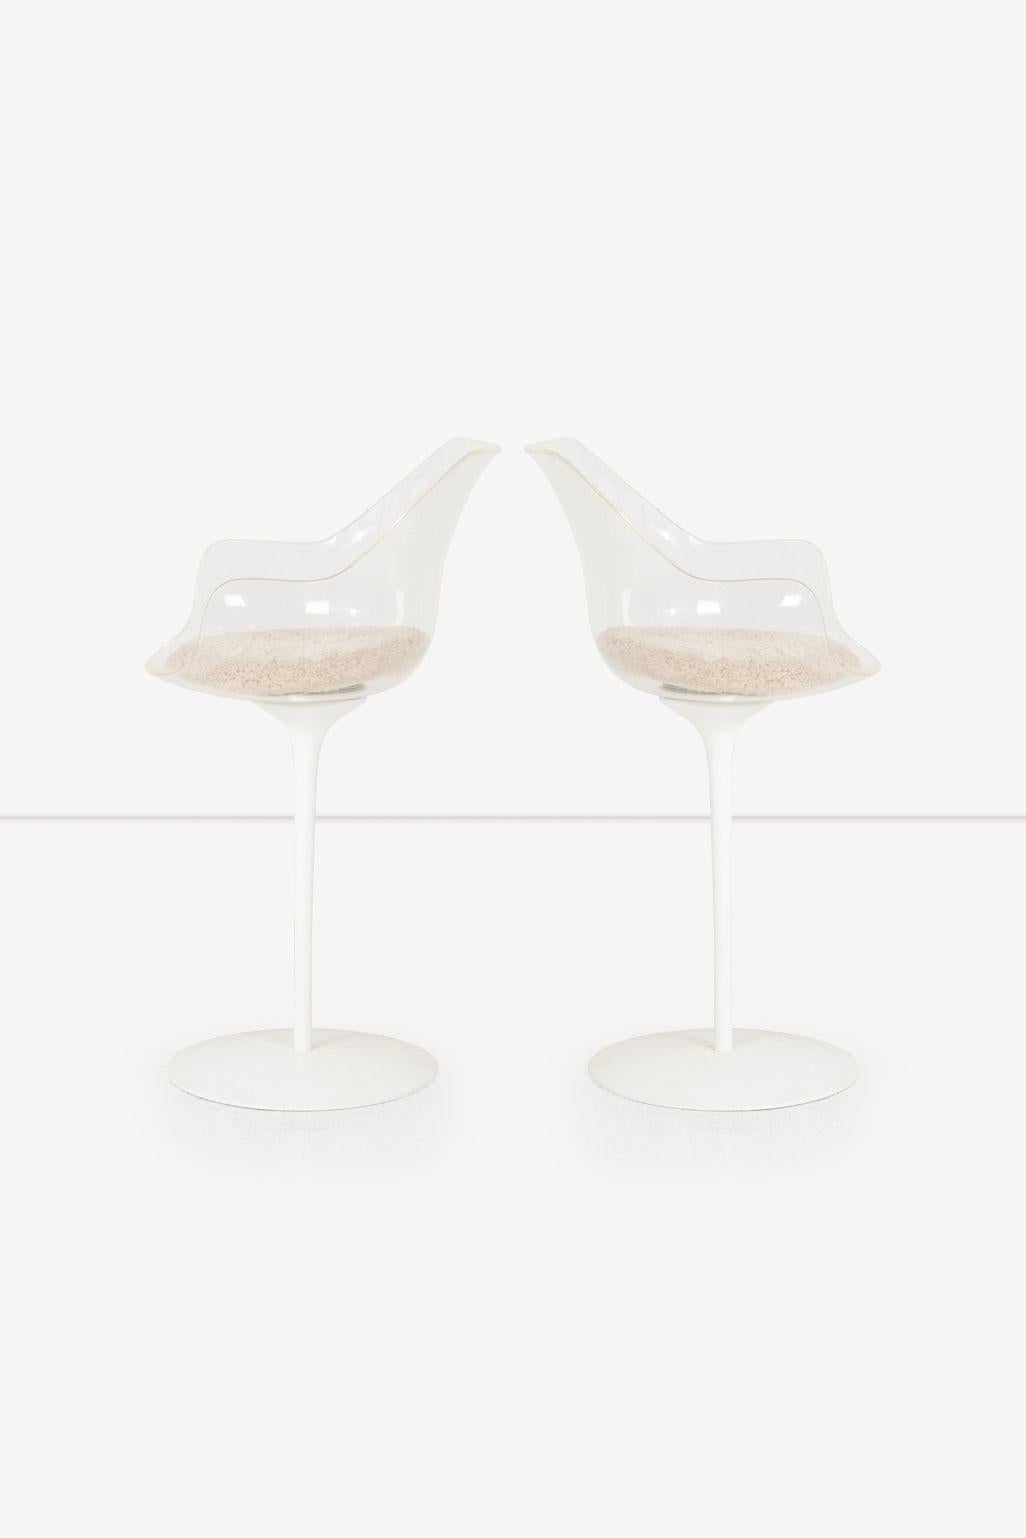 American Pair Erwine & Estelle Laverne Champagne Stools For Sale